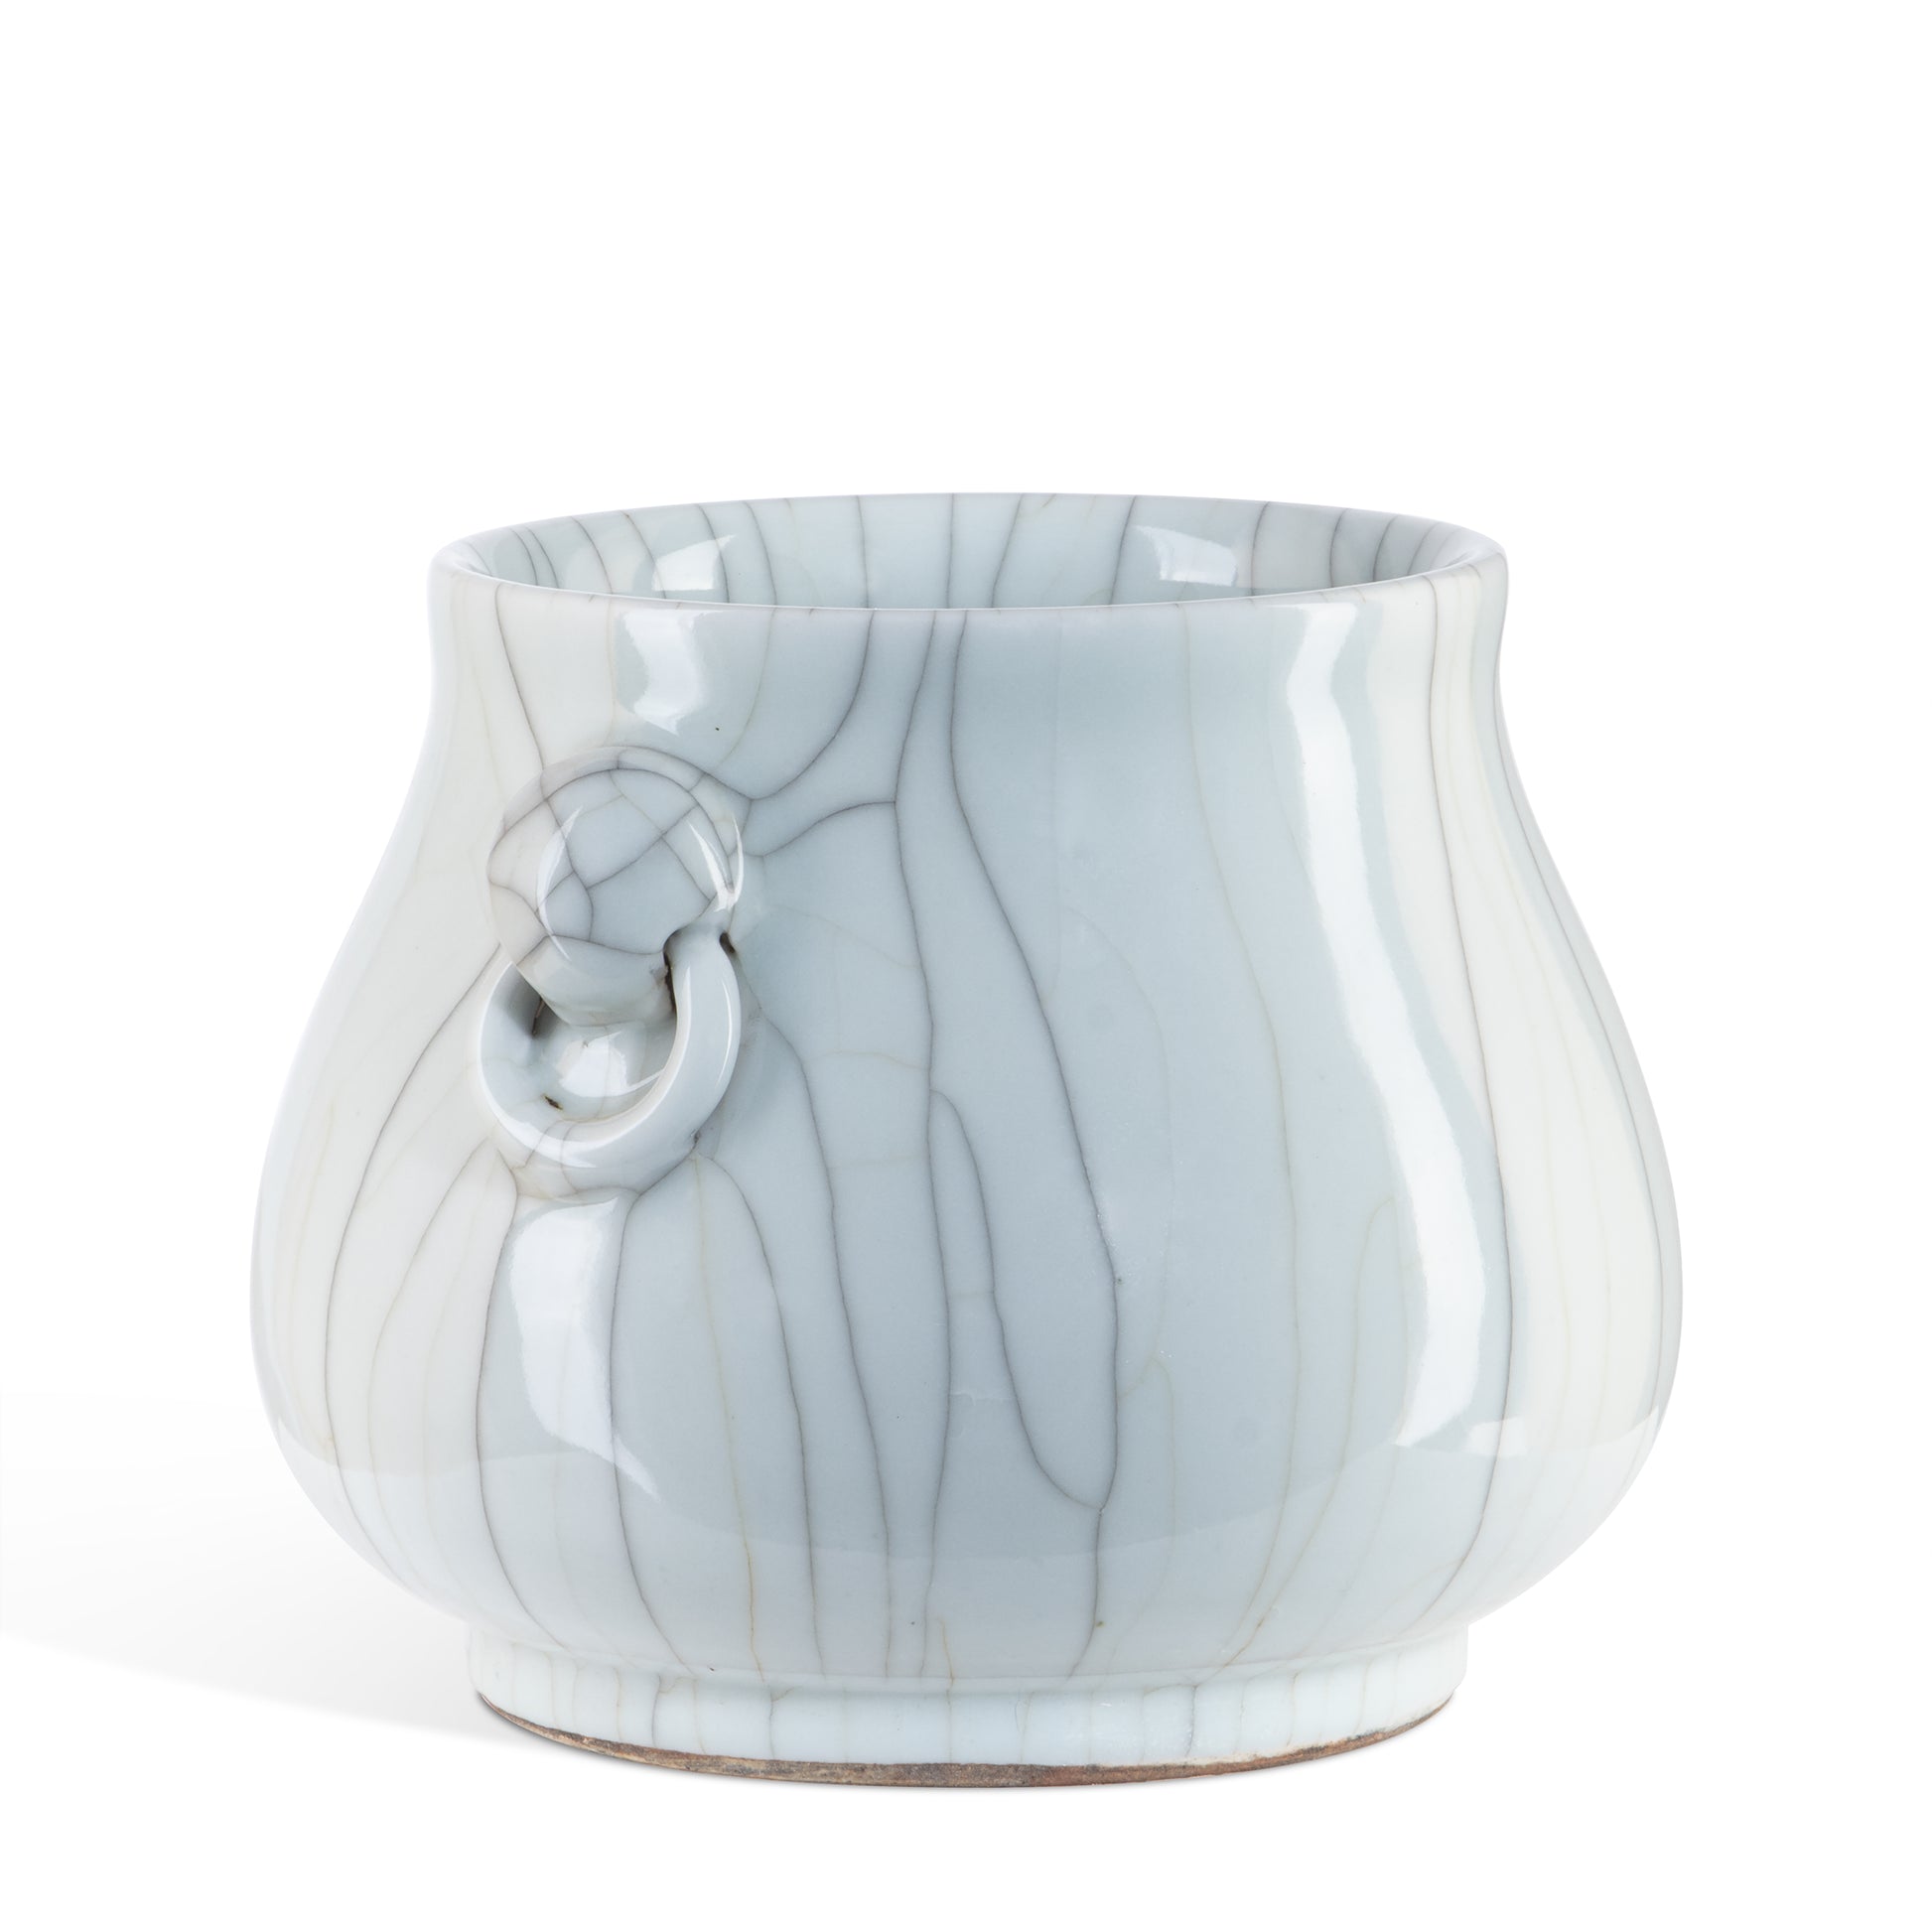 The Celadon Planter by Currey & Company | Luxury Vases, Jars & Bowls | Willow & Albert Home